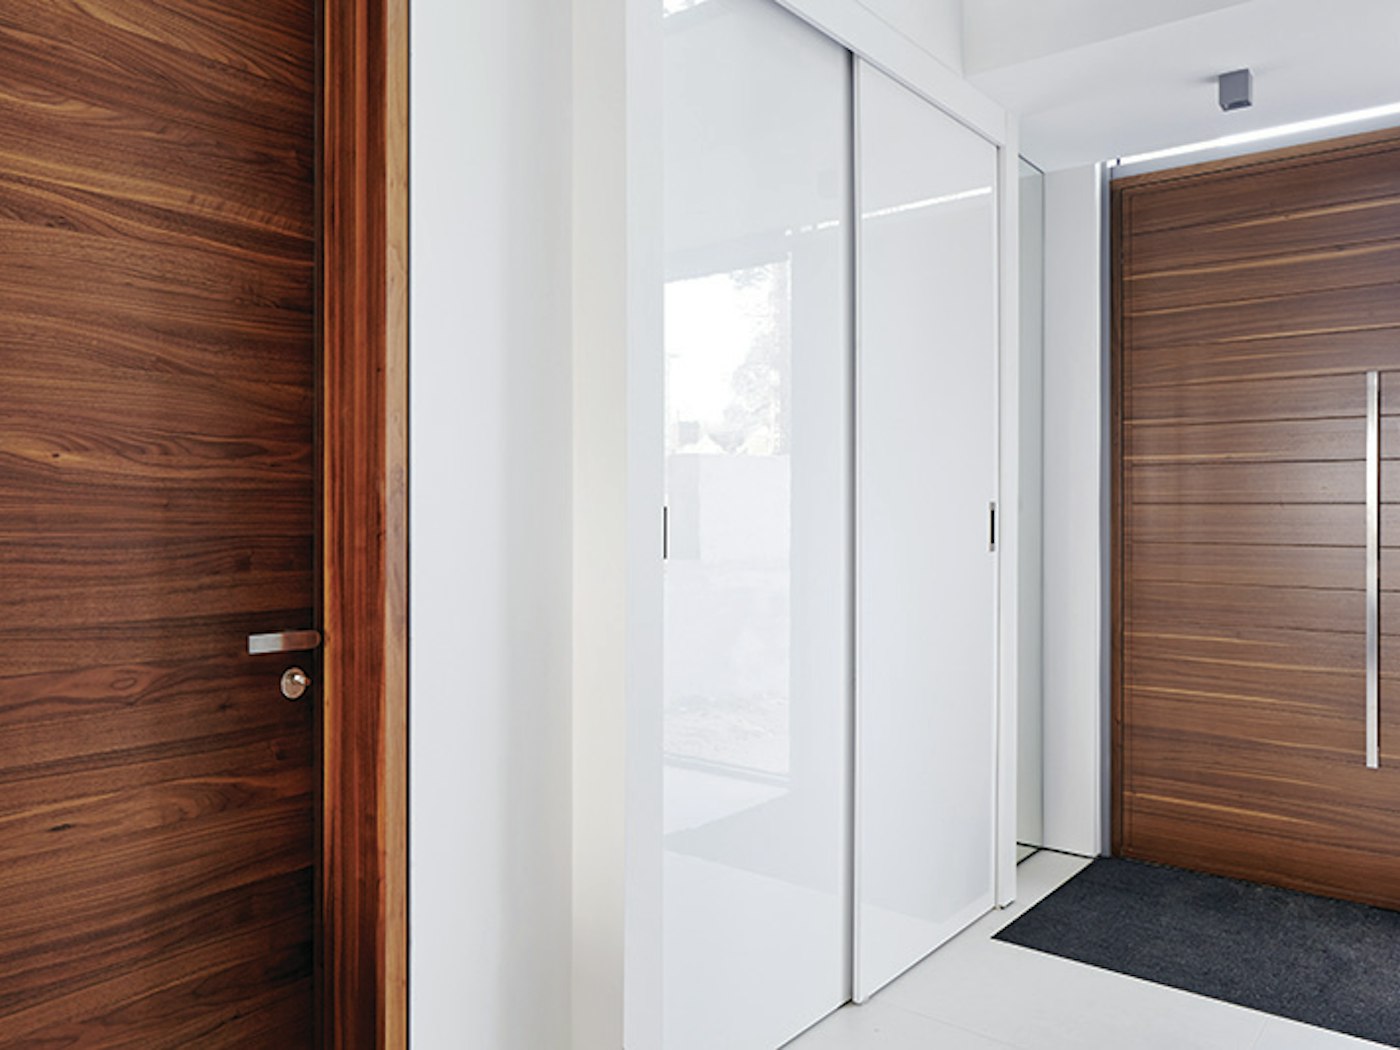 sliding cupboard doors match the wall whilst the front and internal doors are  similar